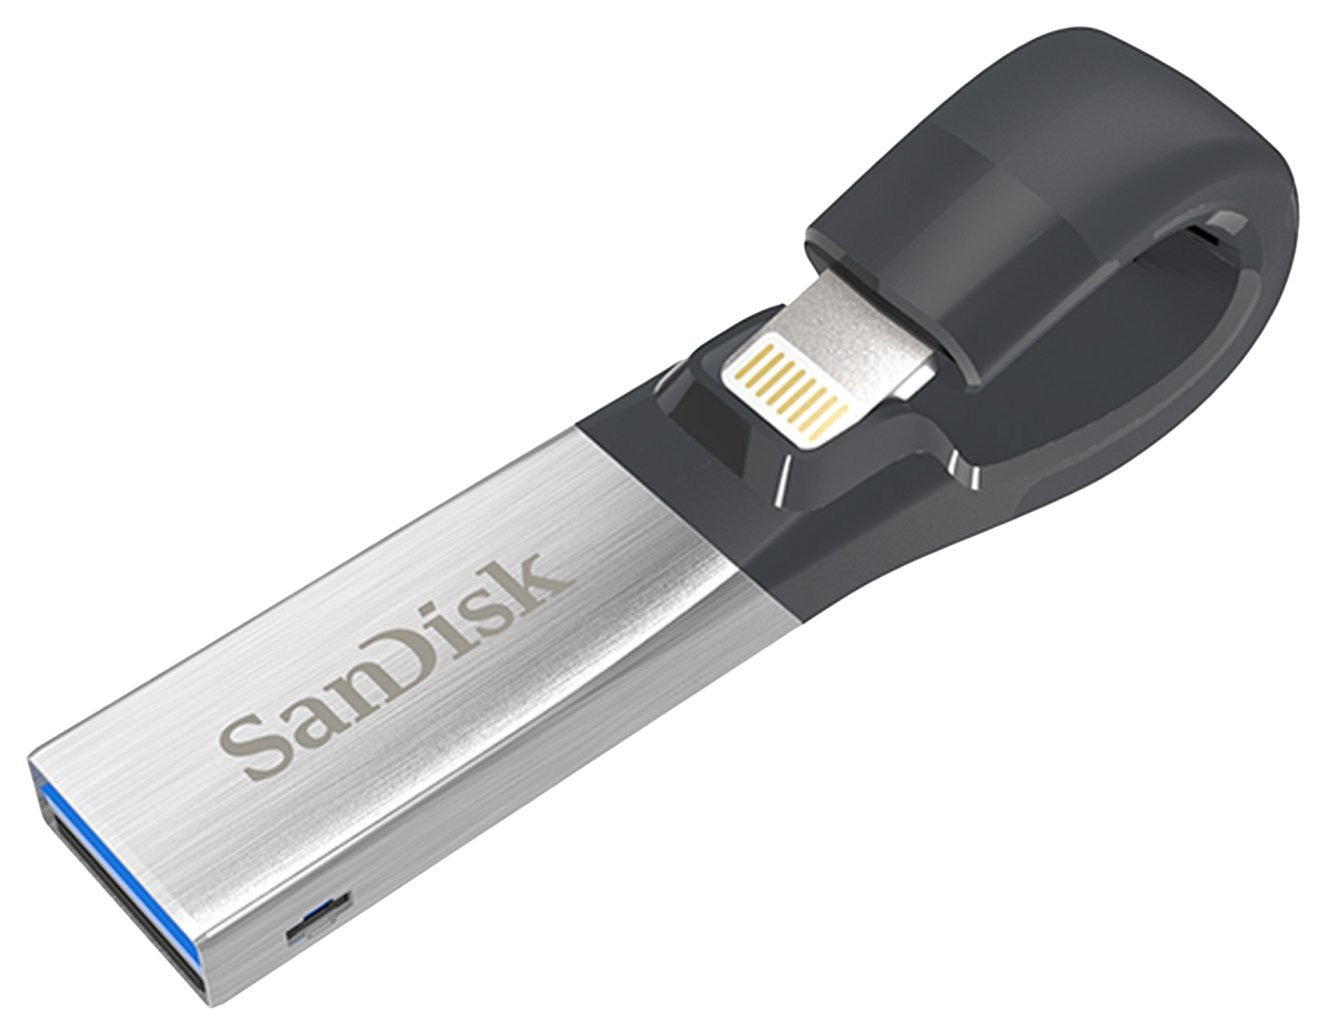 SanDisk iXpand Flash Drive, 128GB, for iPhone and iPad, Black/Silver (SDIX30C-128G-GN6NE)